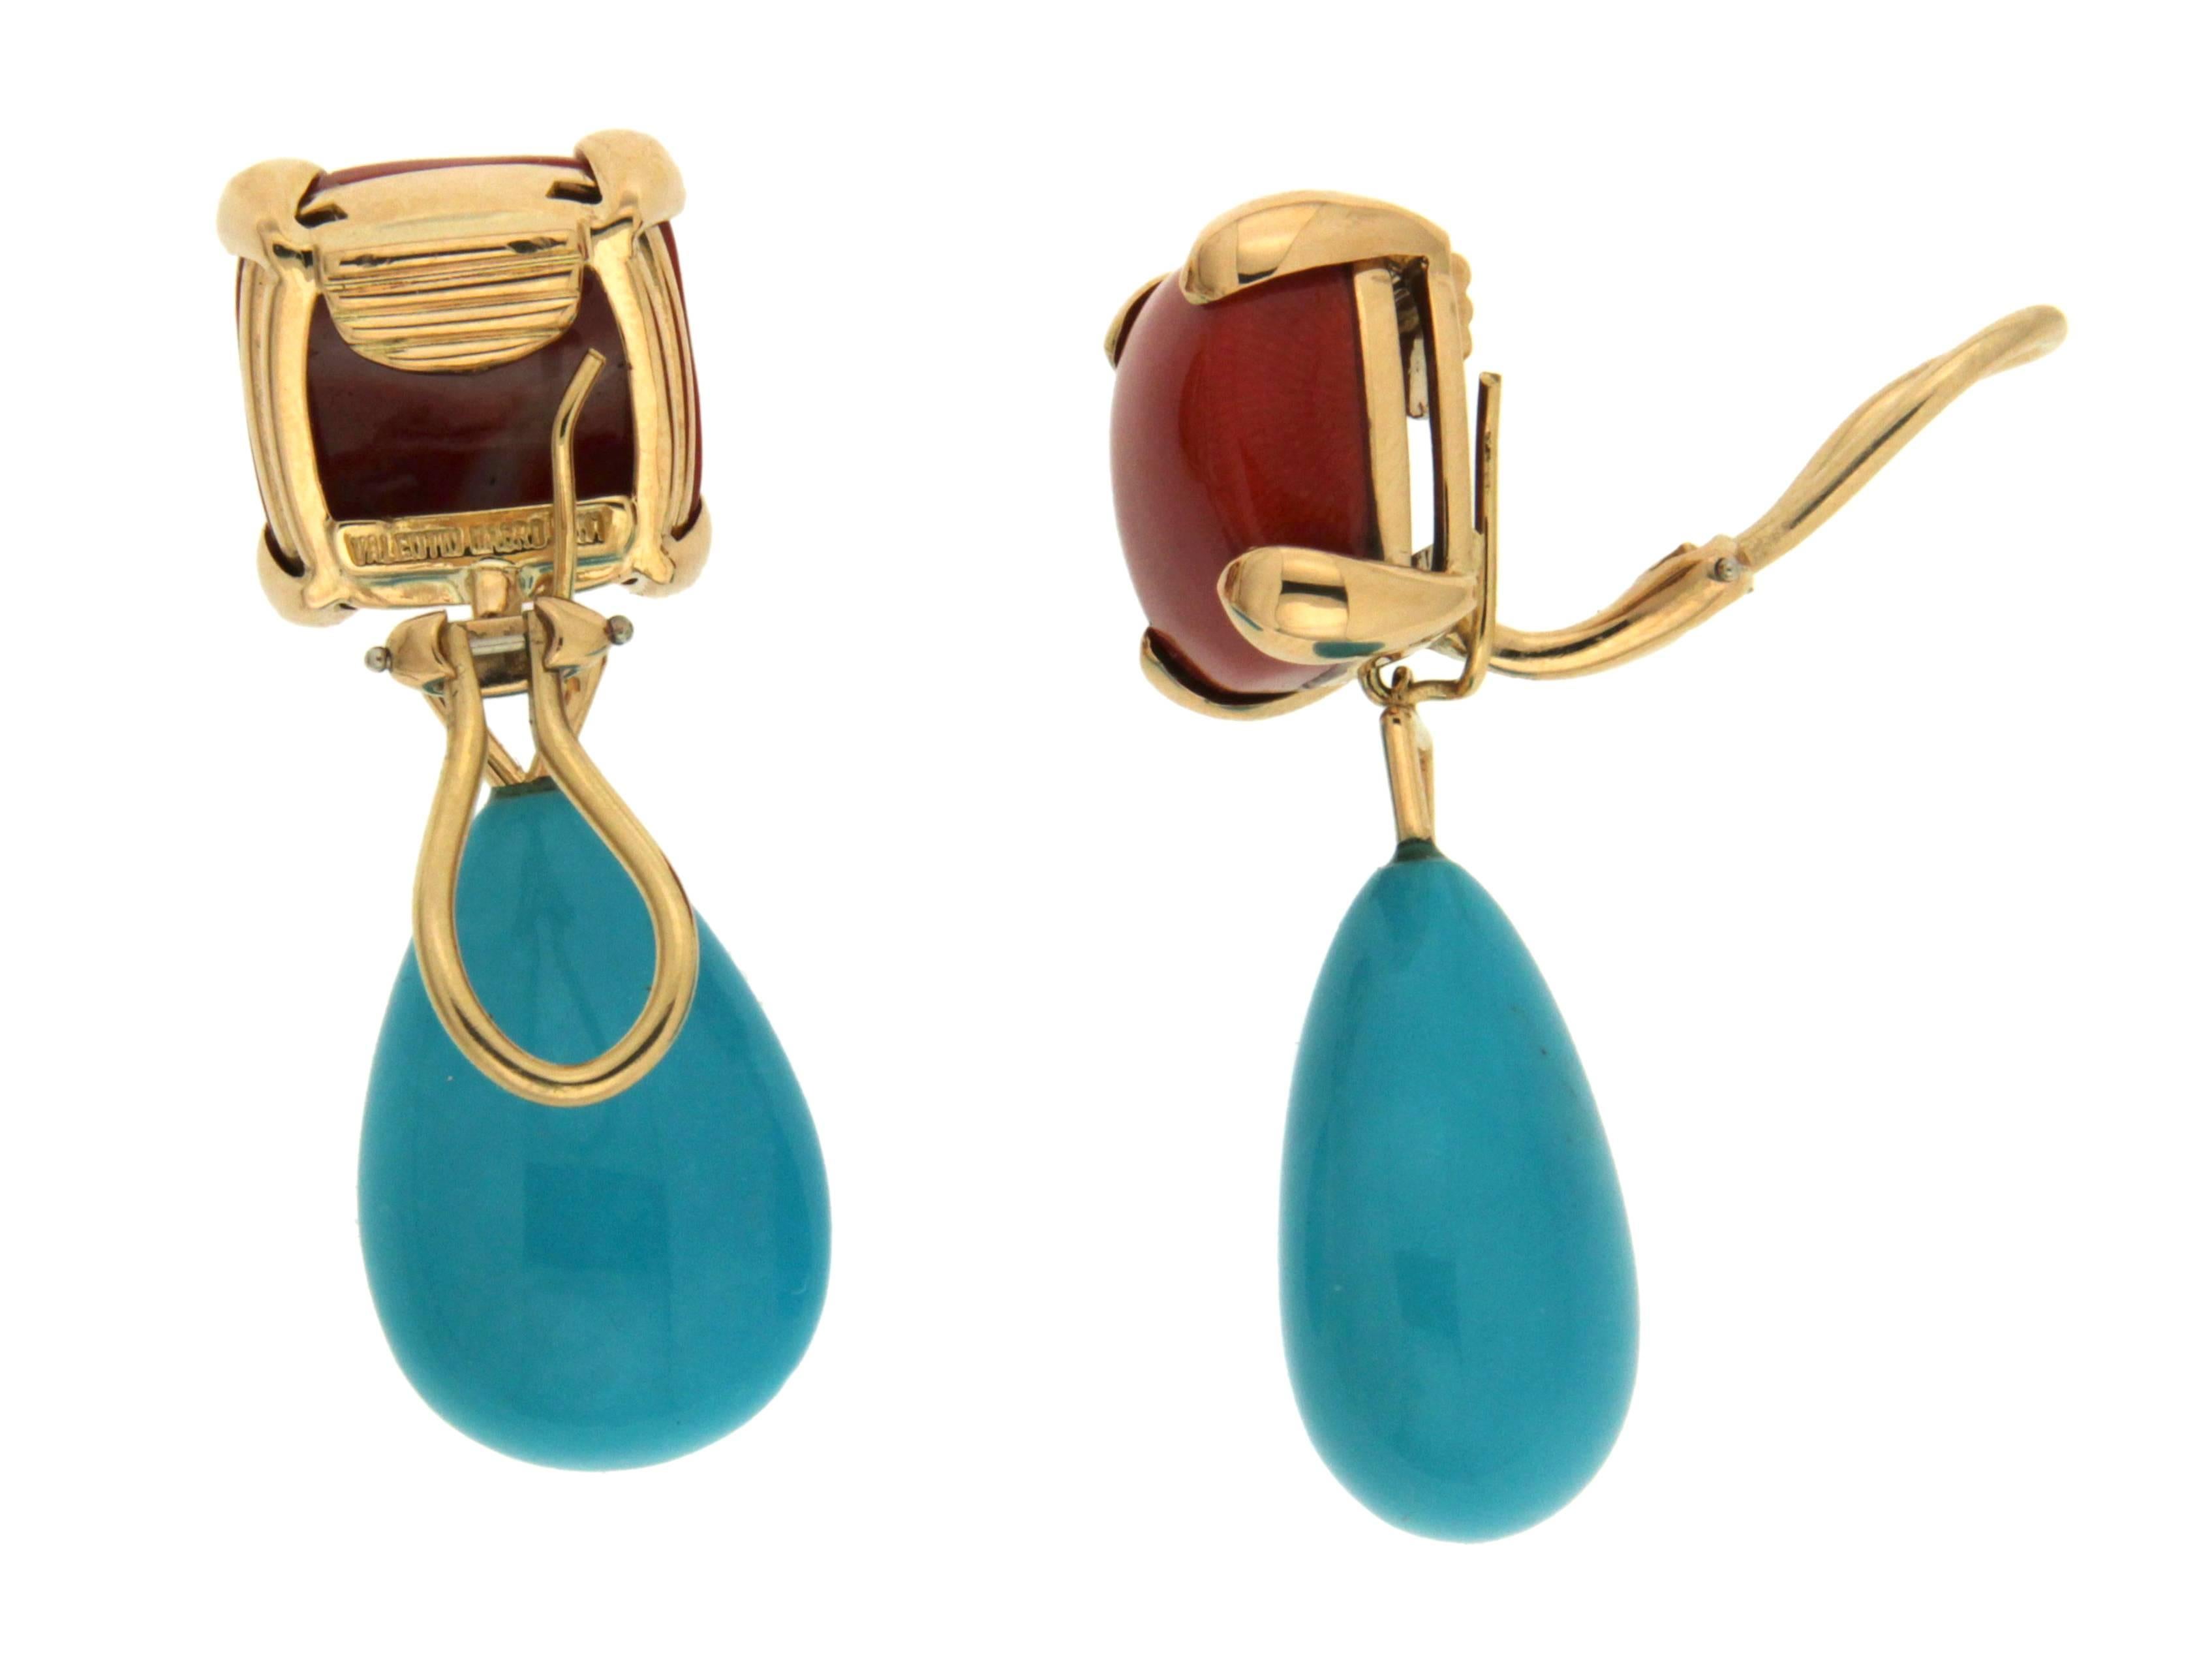 This lovely pair of earrings features coral cushion cabochons and turquoise drops of the finest quality, are completed in 18kt yellow gold and clip backs.